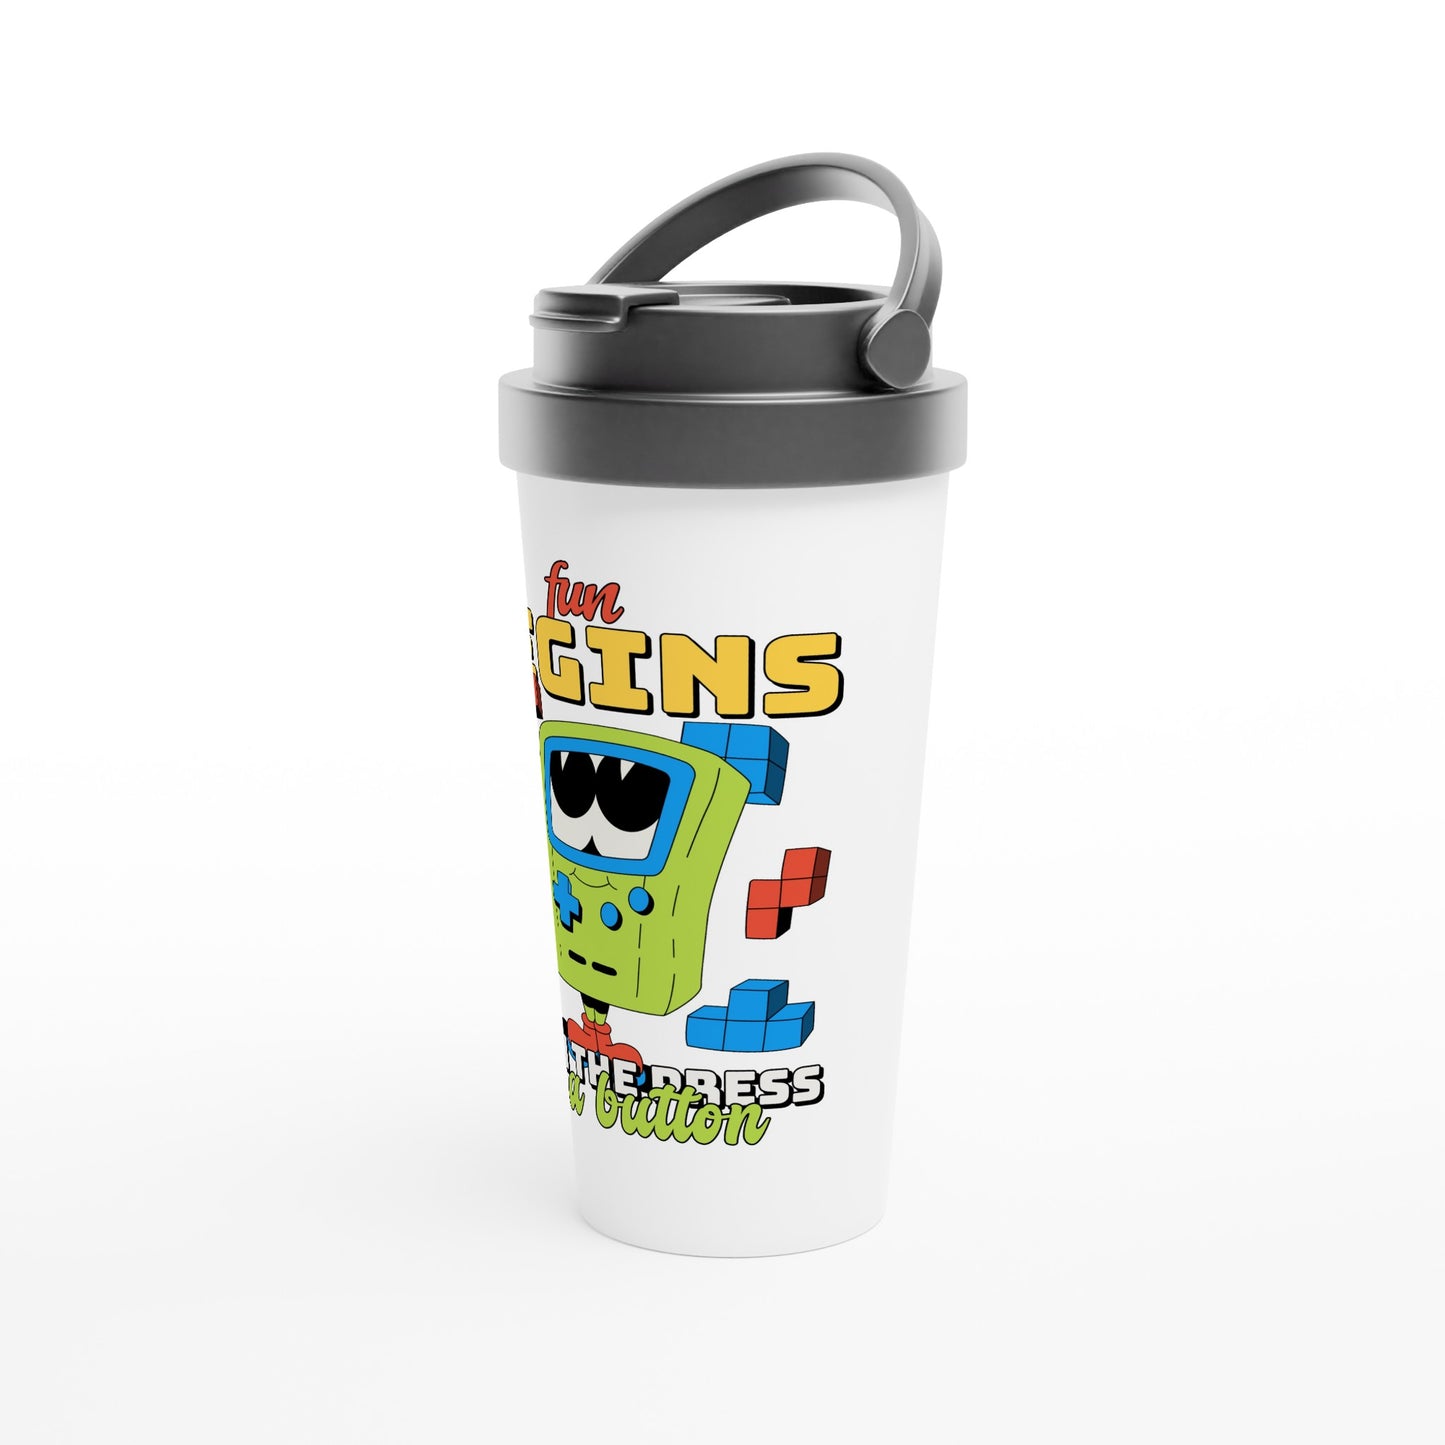 Fun Begins With The Press Of A Button - White 15oz Stainless Steel Travel Mug Travel Mug Games